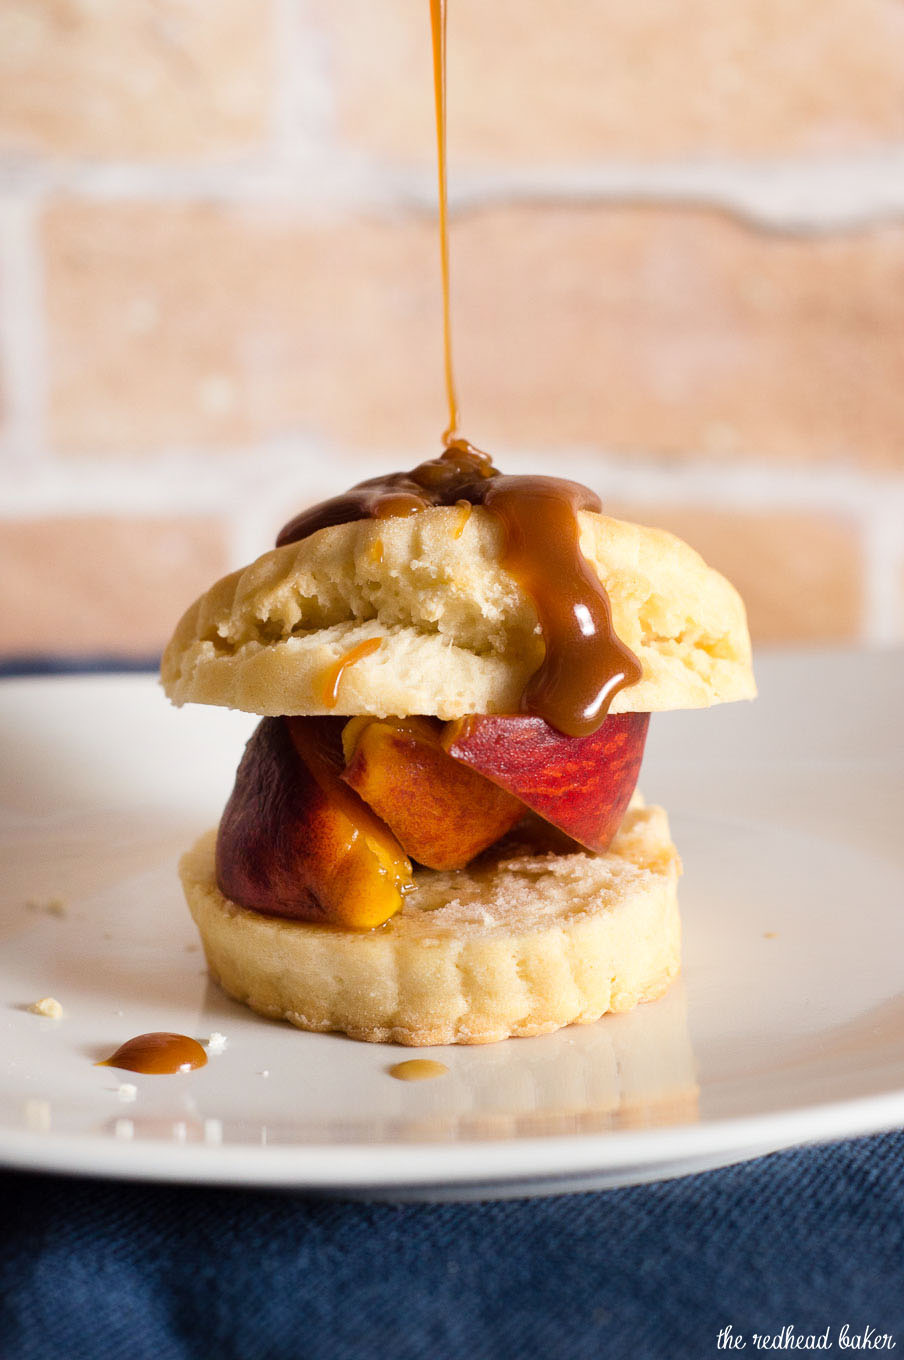 Like the classic strawberry version, peach shortcake combines a sweet biscuit with brandied brown-sugar peaches, and is topped off with a drizzle of salted caramel sauce. #CookoutWeek